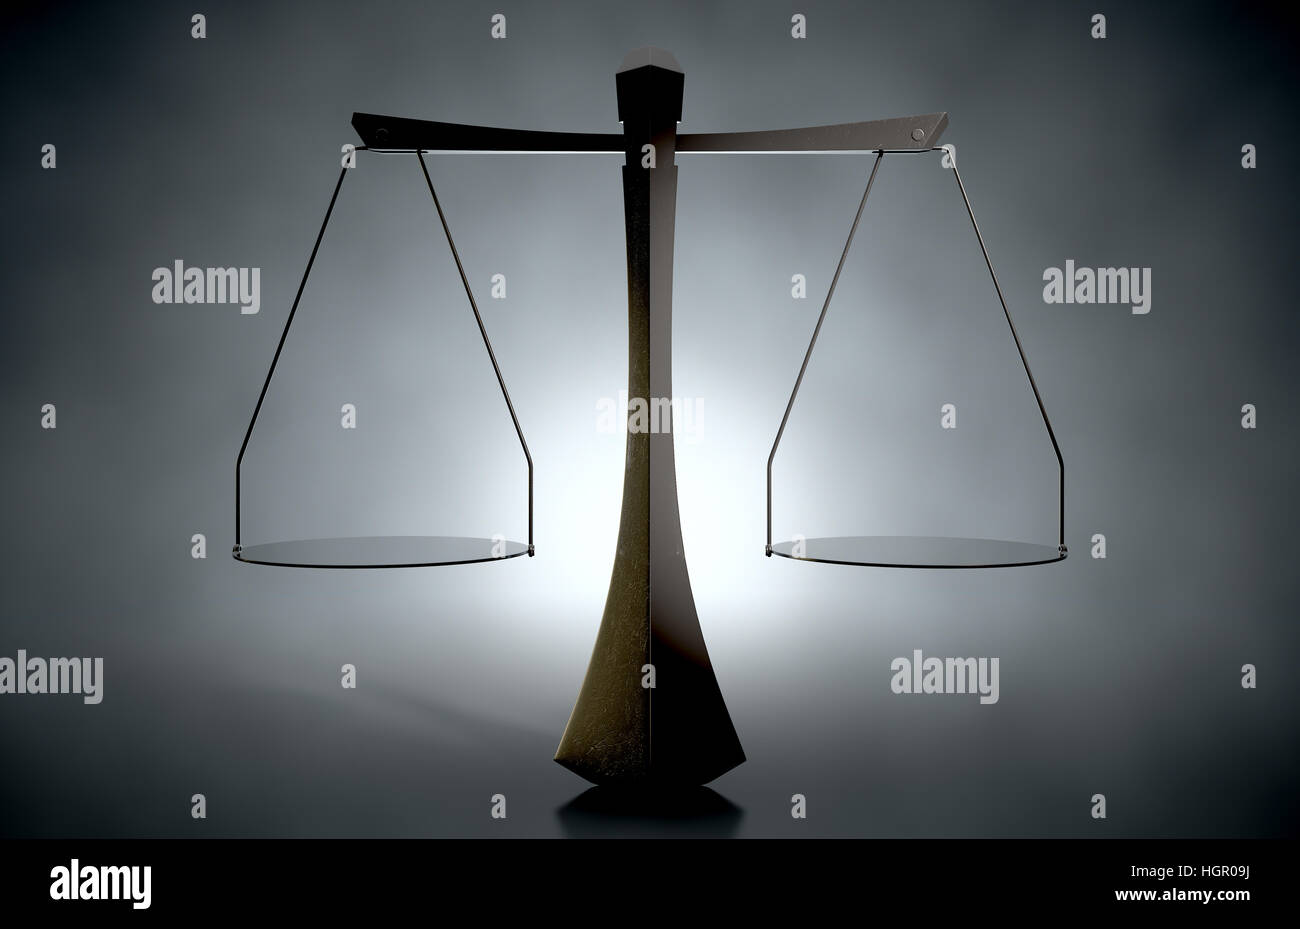 A 3D render of a modern simplistic justice scale back lit on an eerie dark background Stock Photo